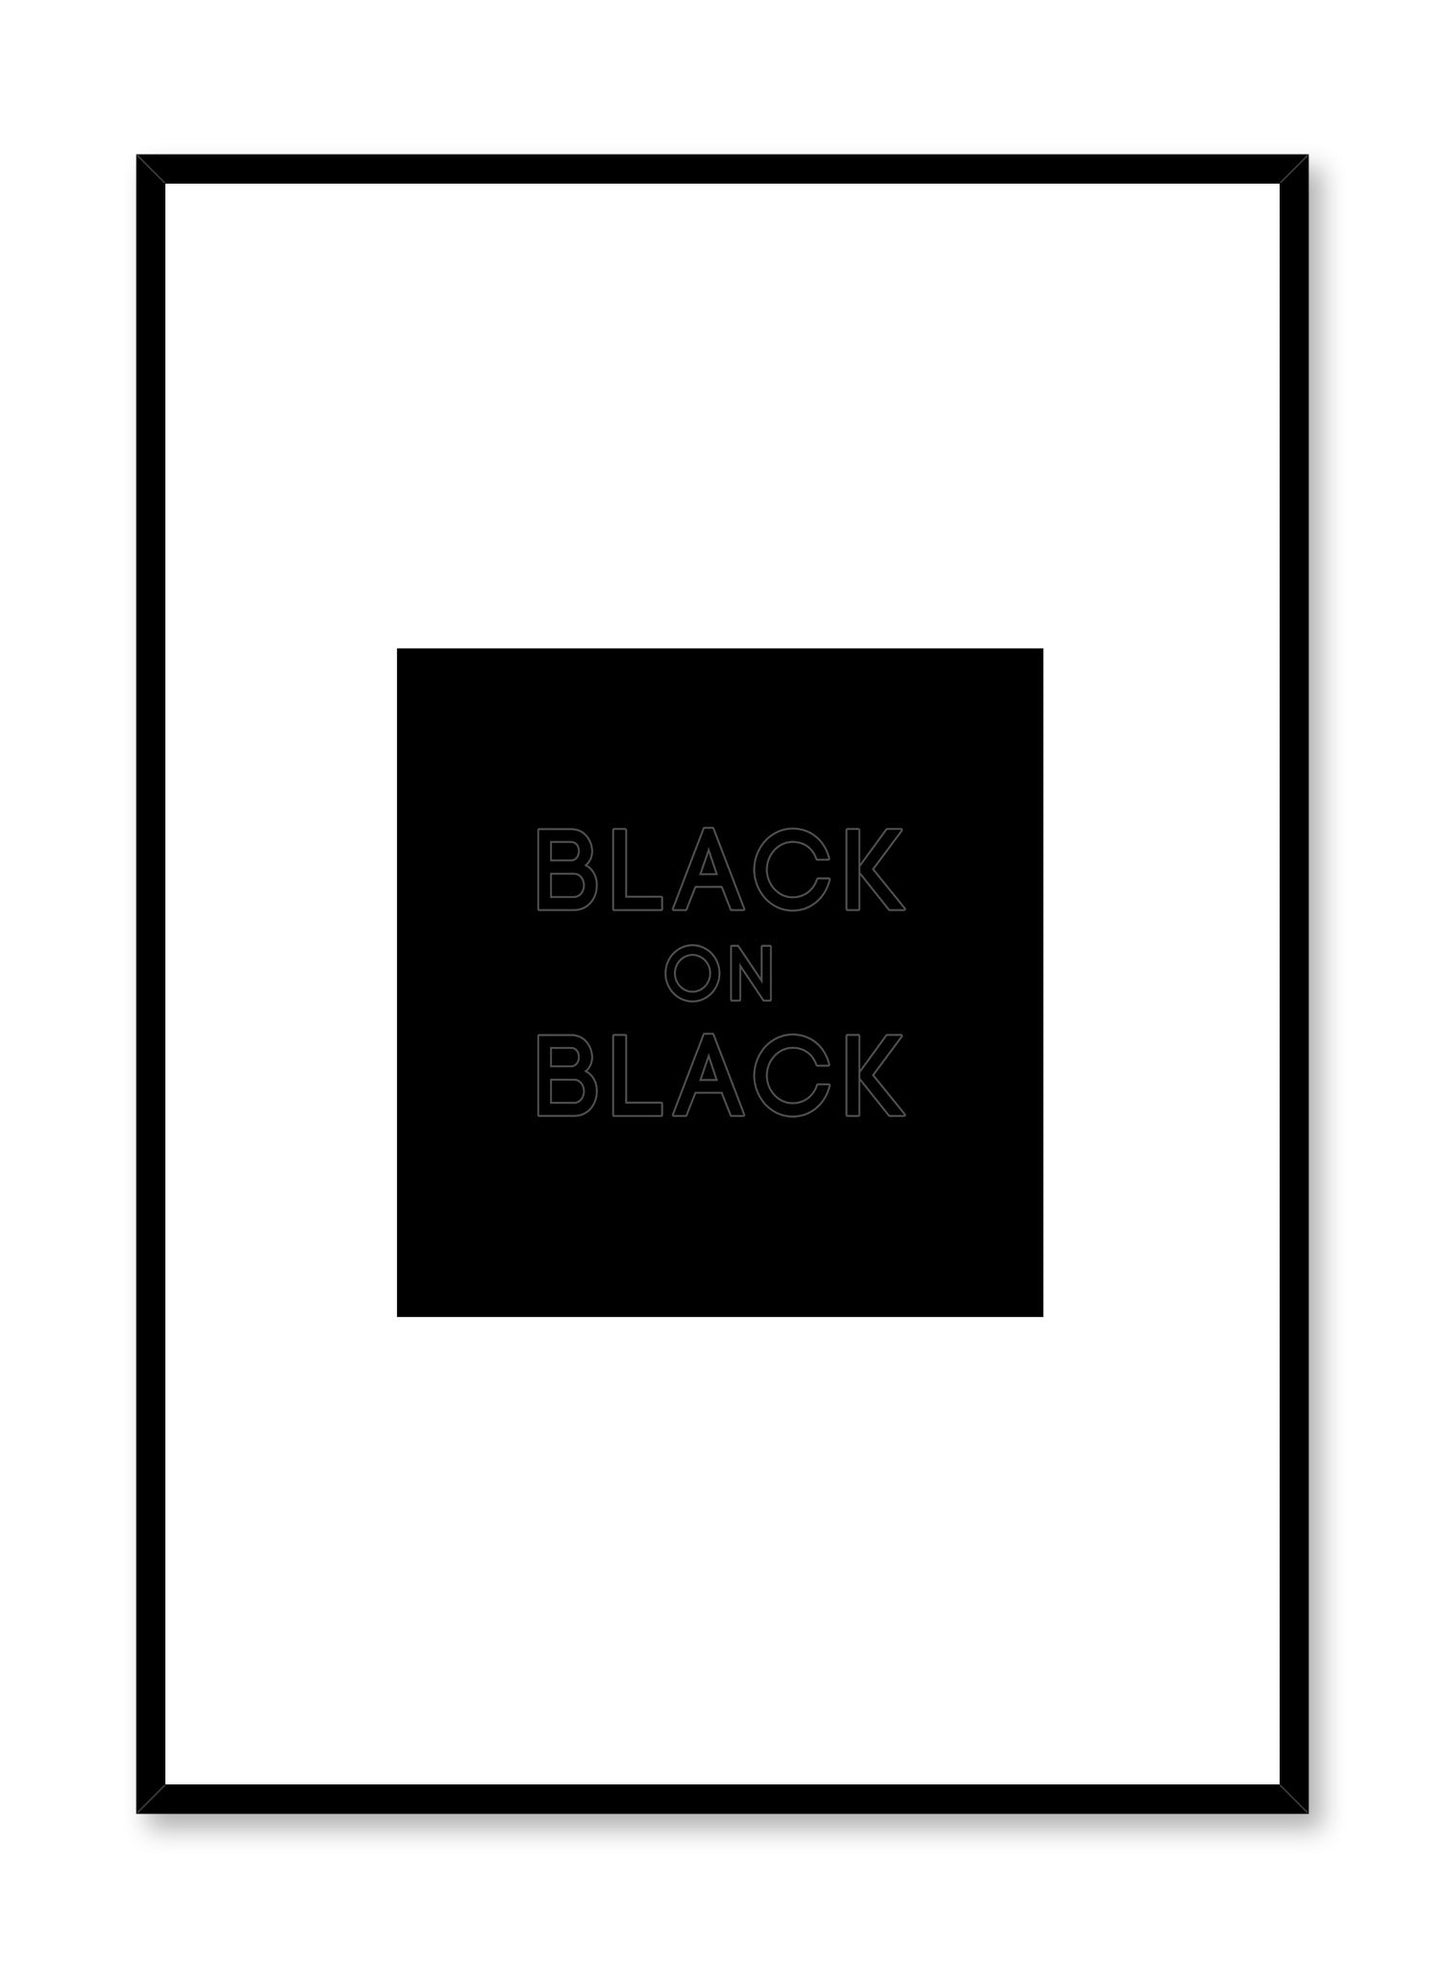 Modern minimalist black and white typography by Opposite Wall with Black on Black quote